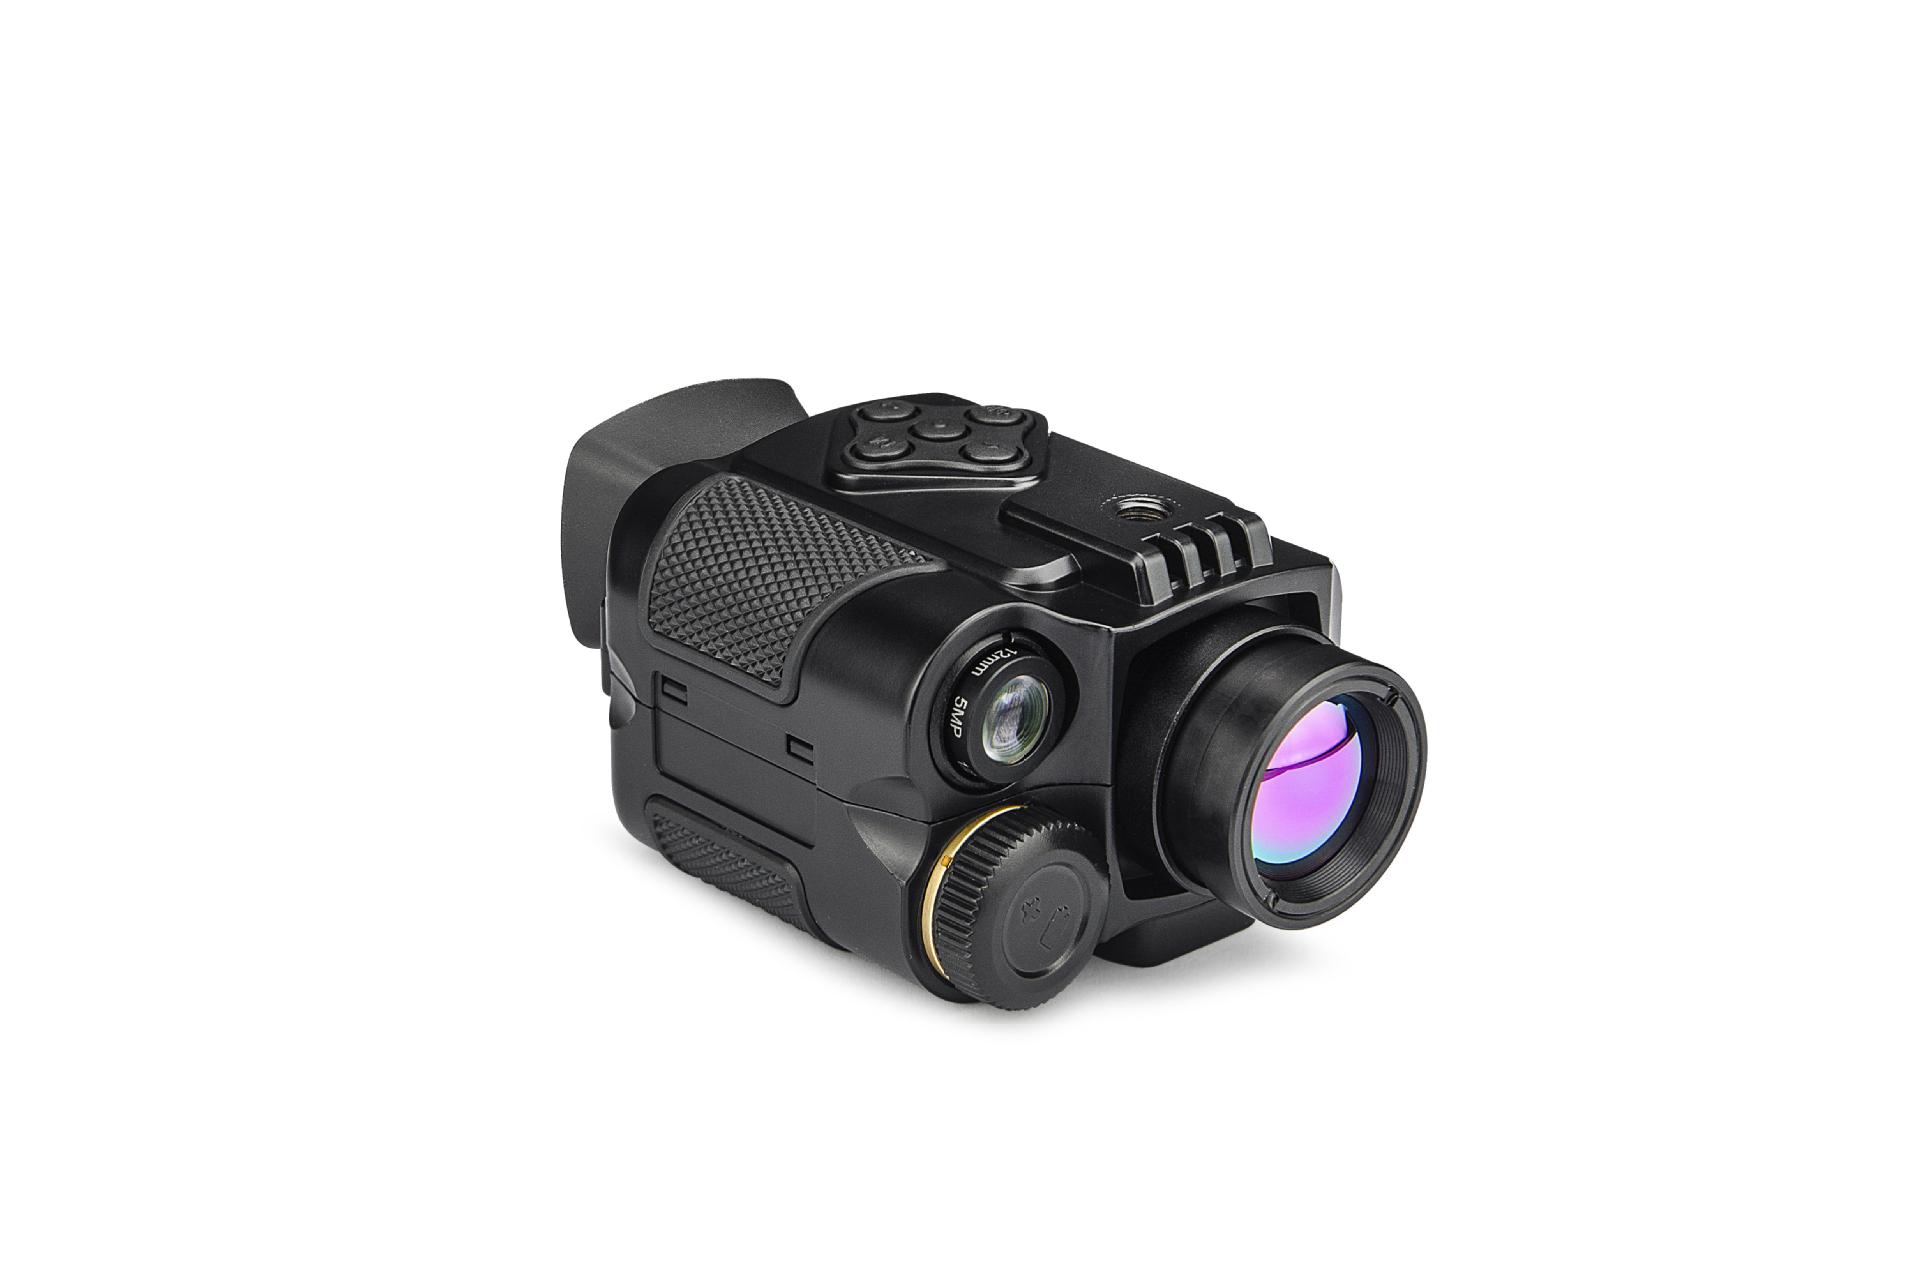 SEACAT Sea Cat hold Mini Imager Compact and portable Night vision patrol